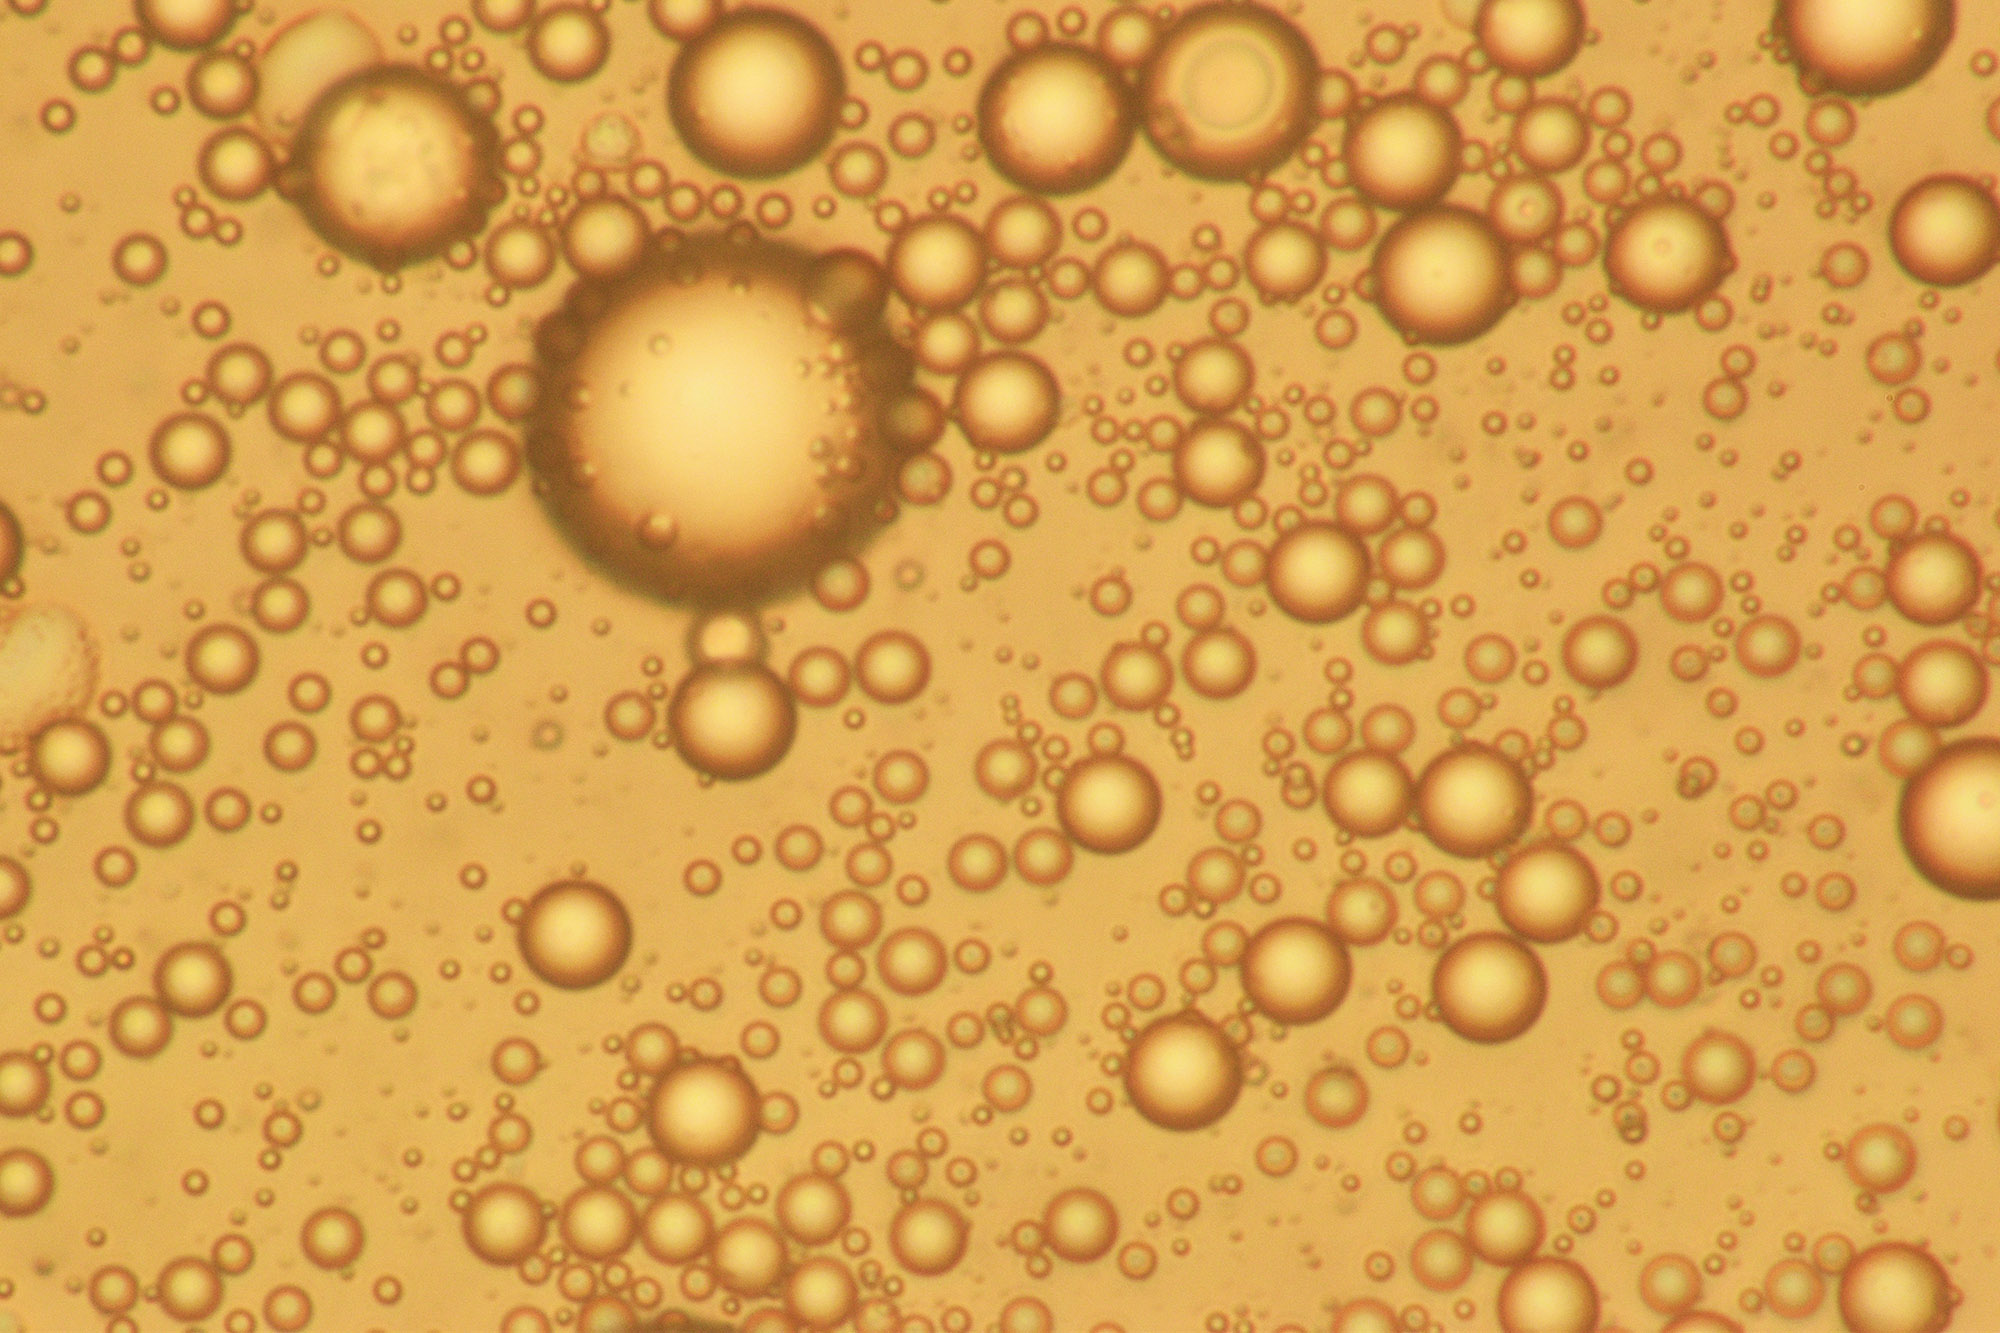 Microscope image of micrometric bubbles produced by mechanical agitation.